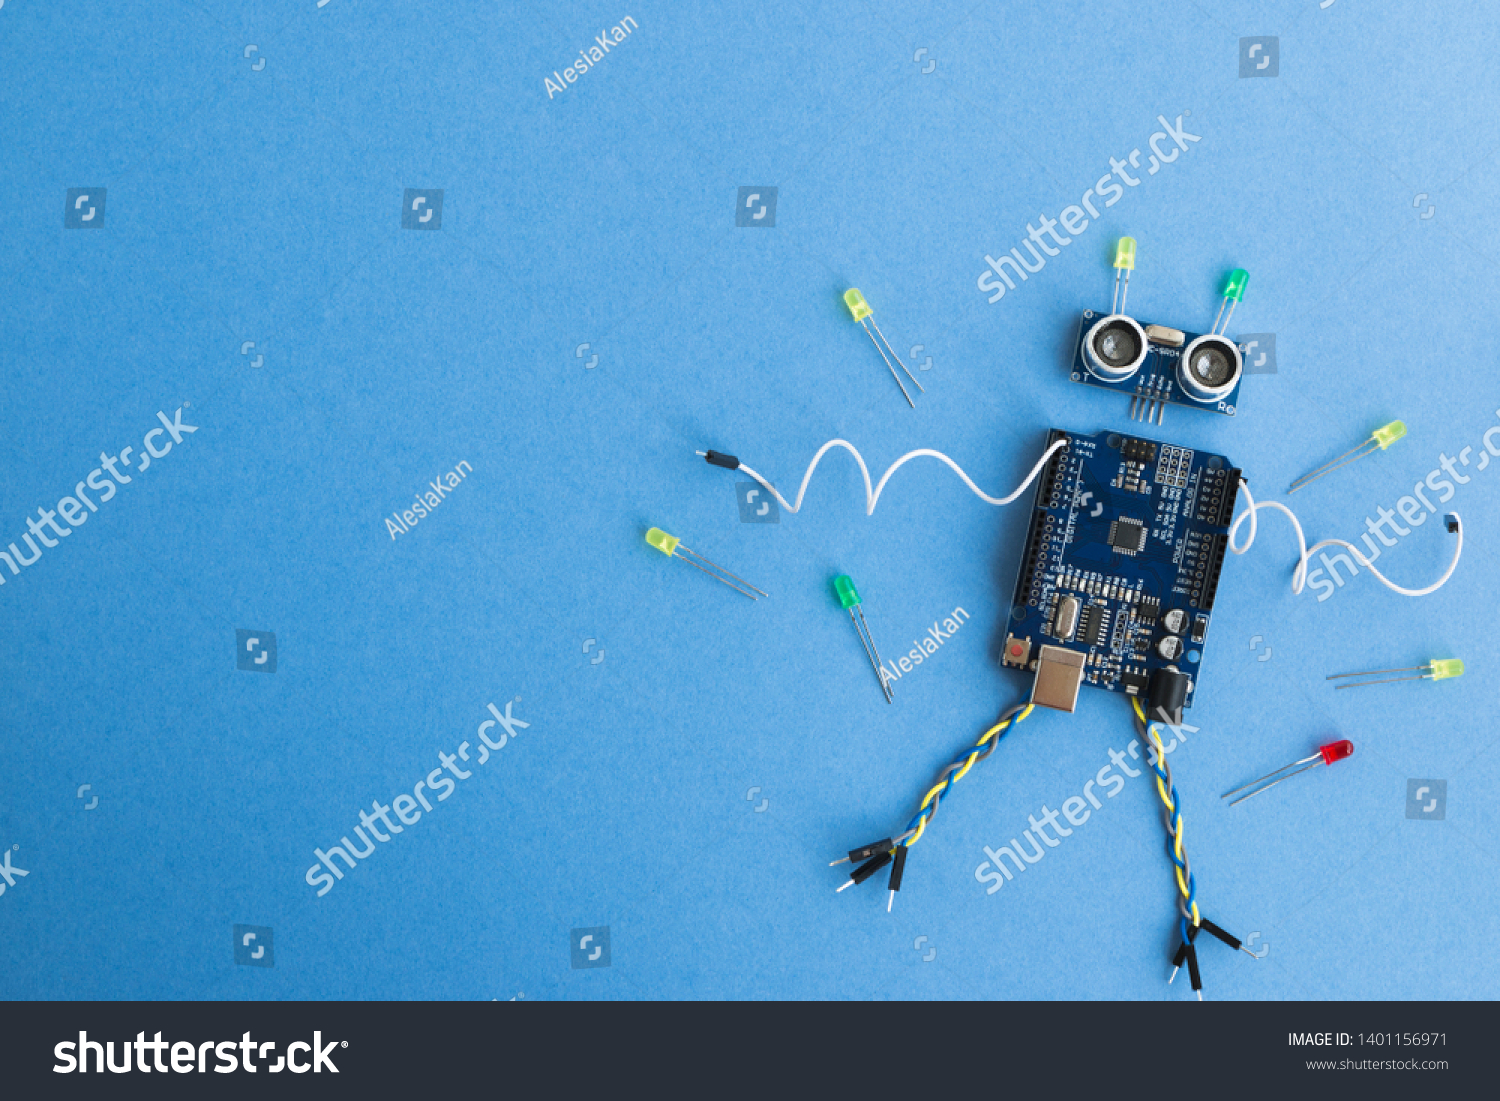 Back to school concept. A metal robot and an electronic board that can be programmed. Robotics and electronics. DIY robotics. STEM and STEAM education for kids. Free space for text. #1401156971